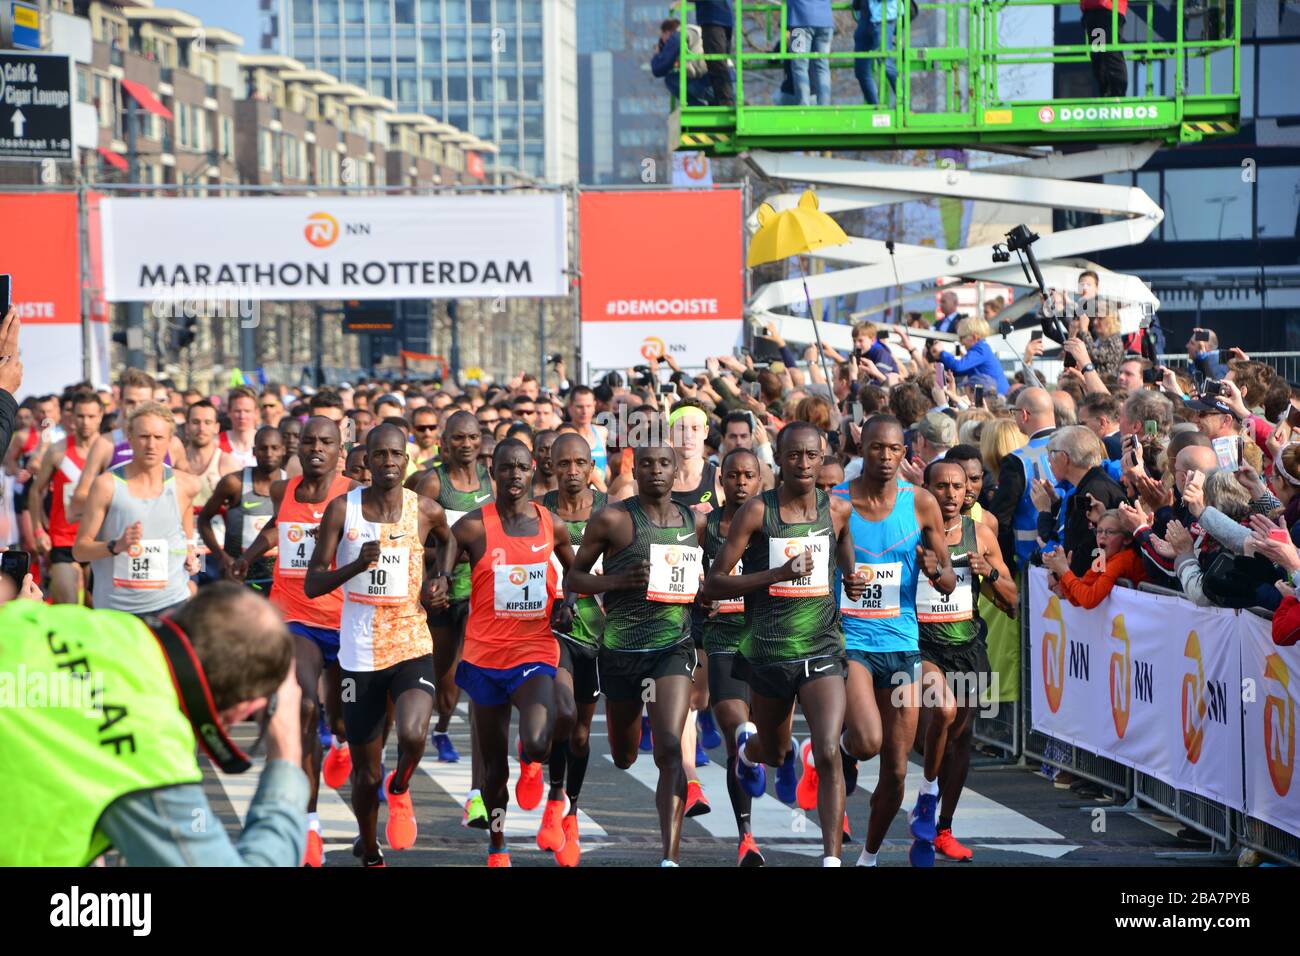 Marathon annual race competition High Resolution Stock Photography and  Images - Alamy